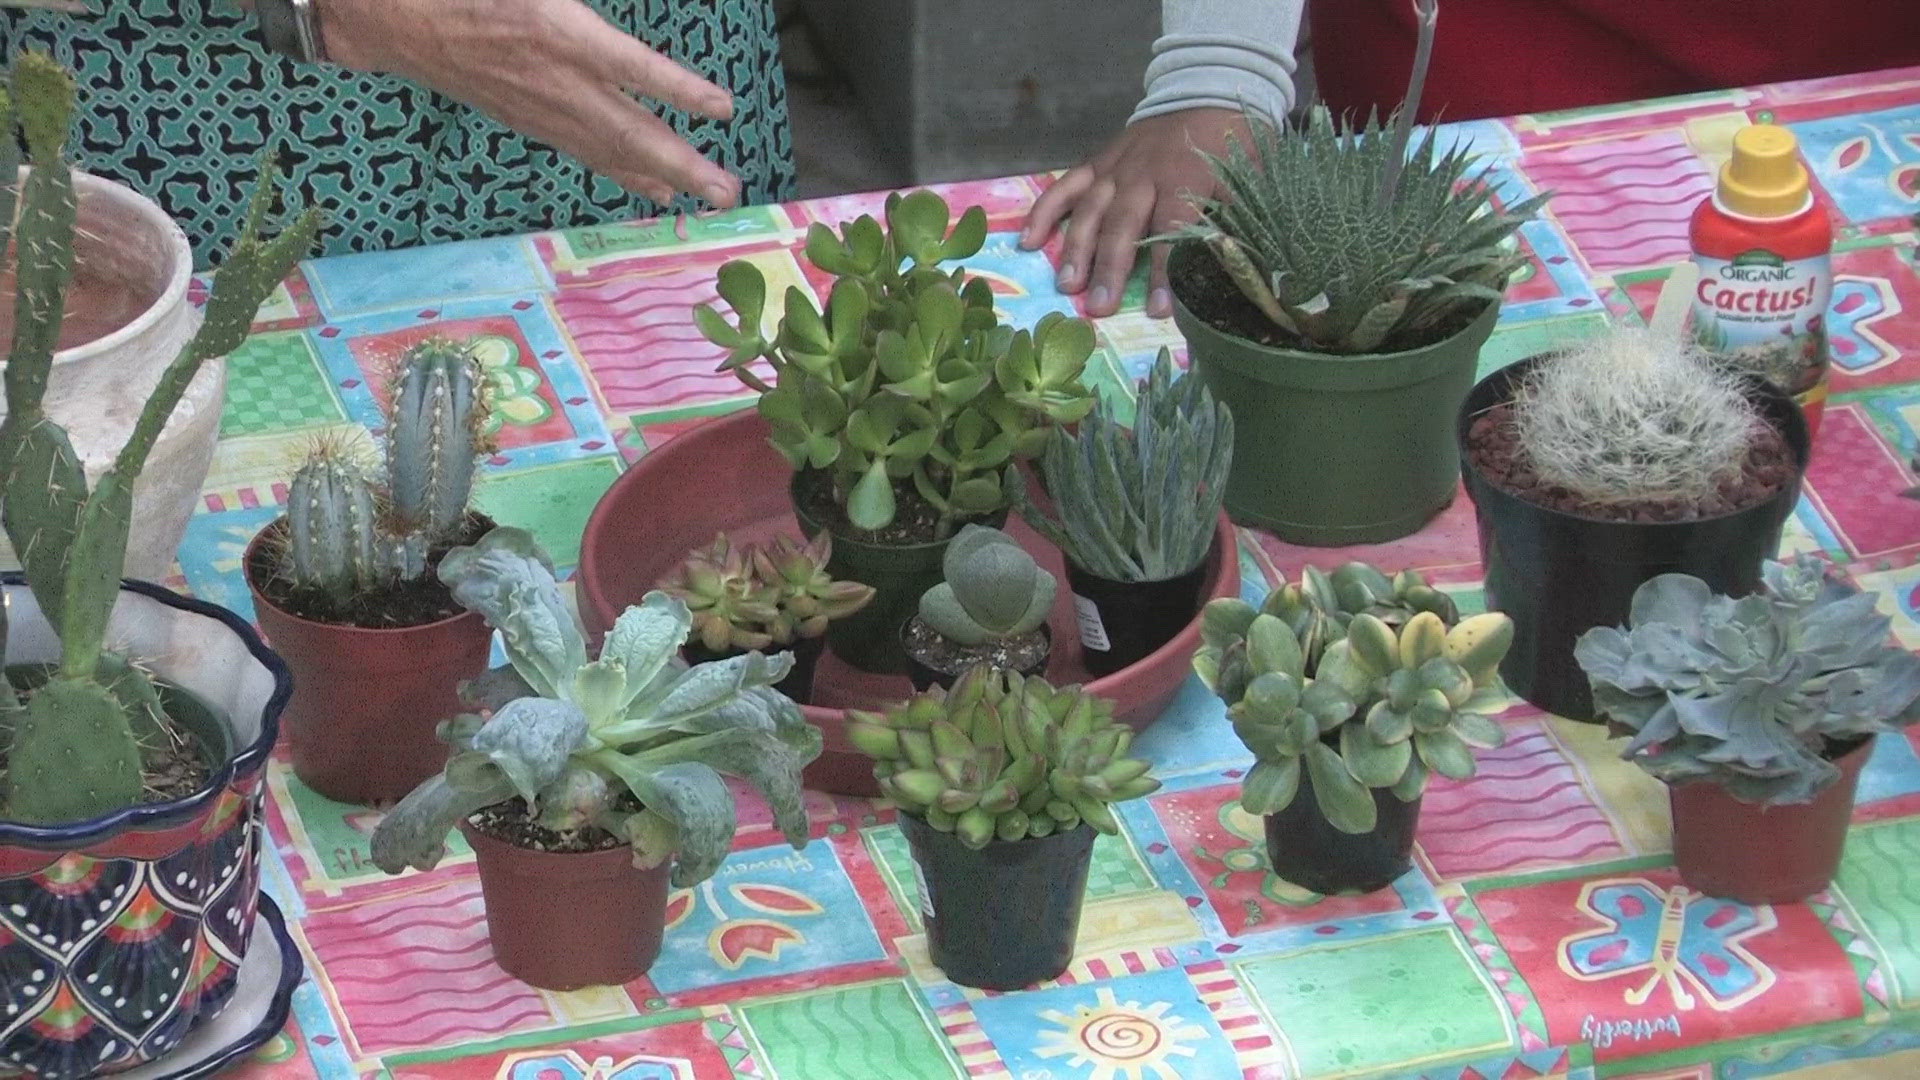 Jennifer Dawe gives some tips and advice for beginners who would like to garden.